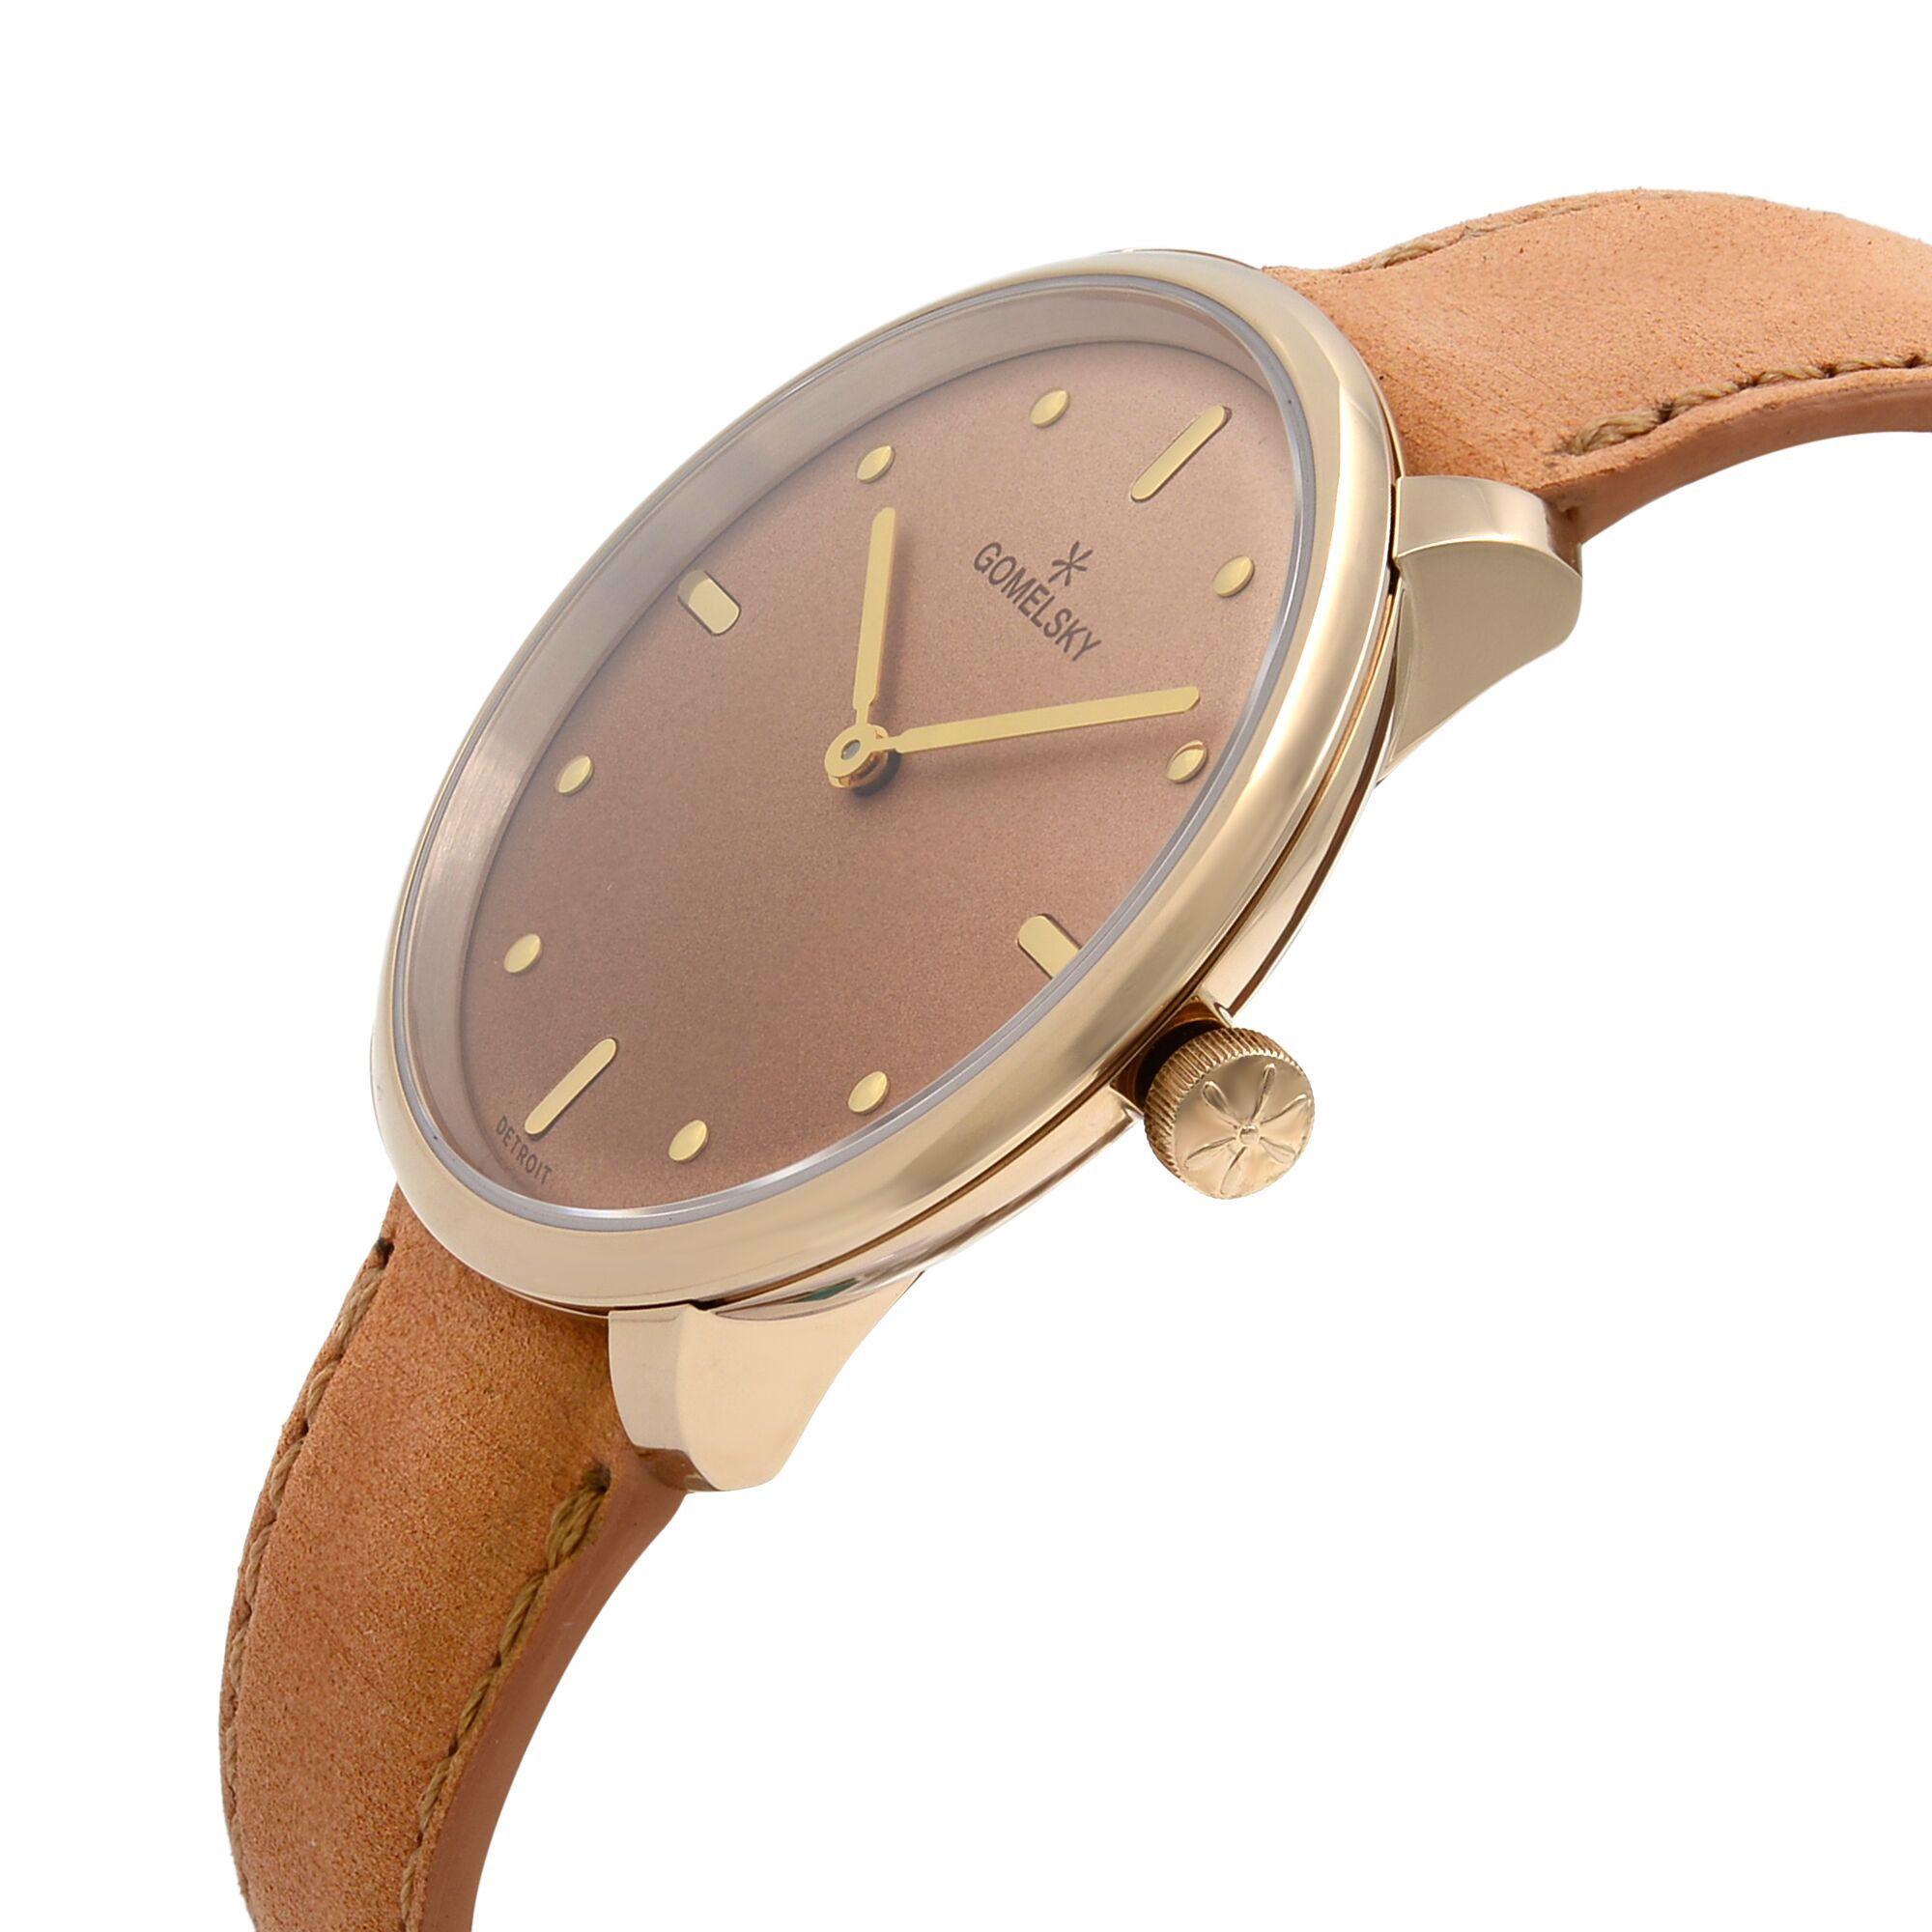 Gomelsky Audrey 6 Gold Tone Steel Tan Dial Quartz Ladies Watch G0120147278 In New Condition For Sale In New York, NY